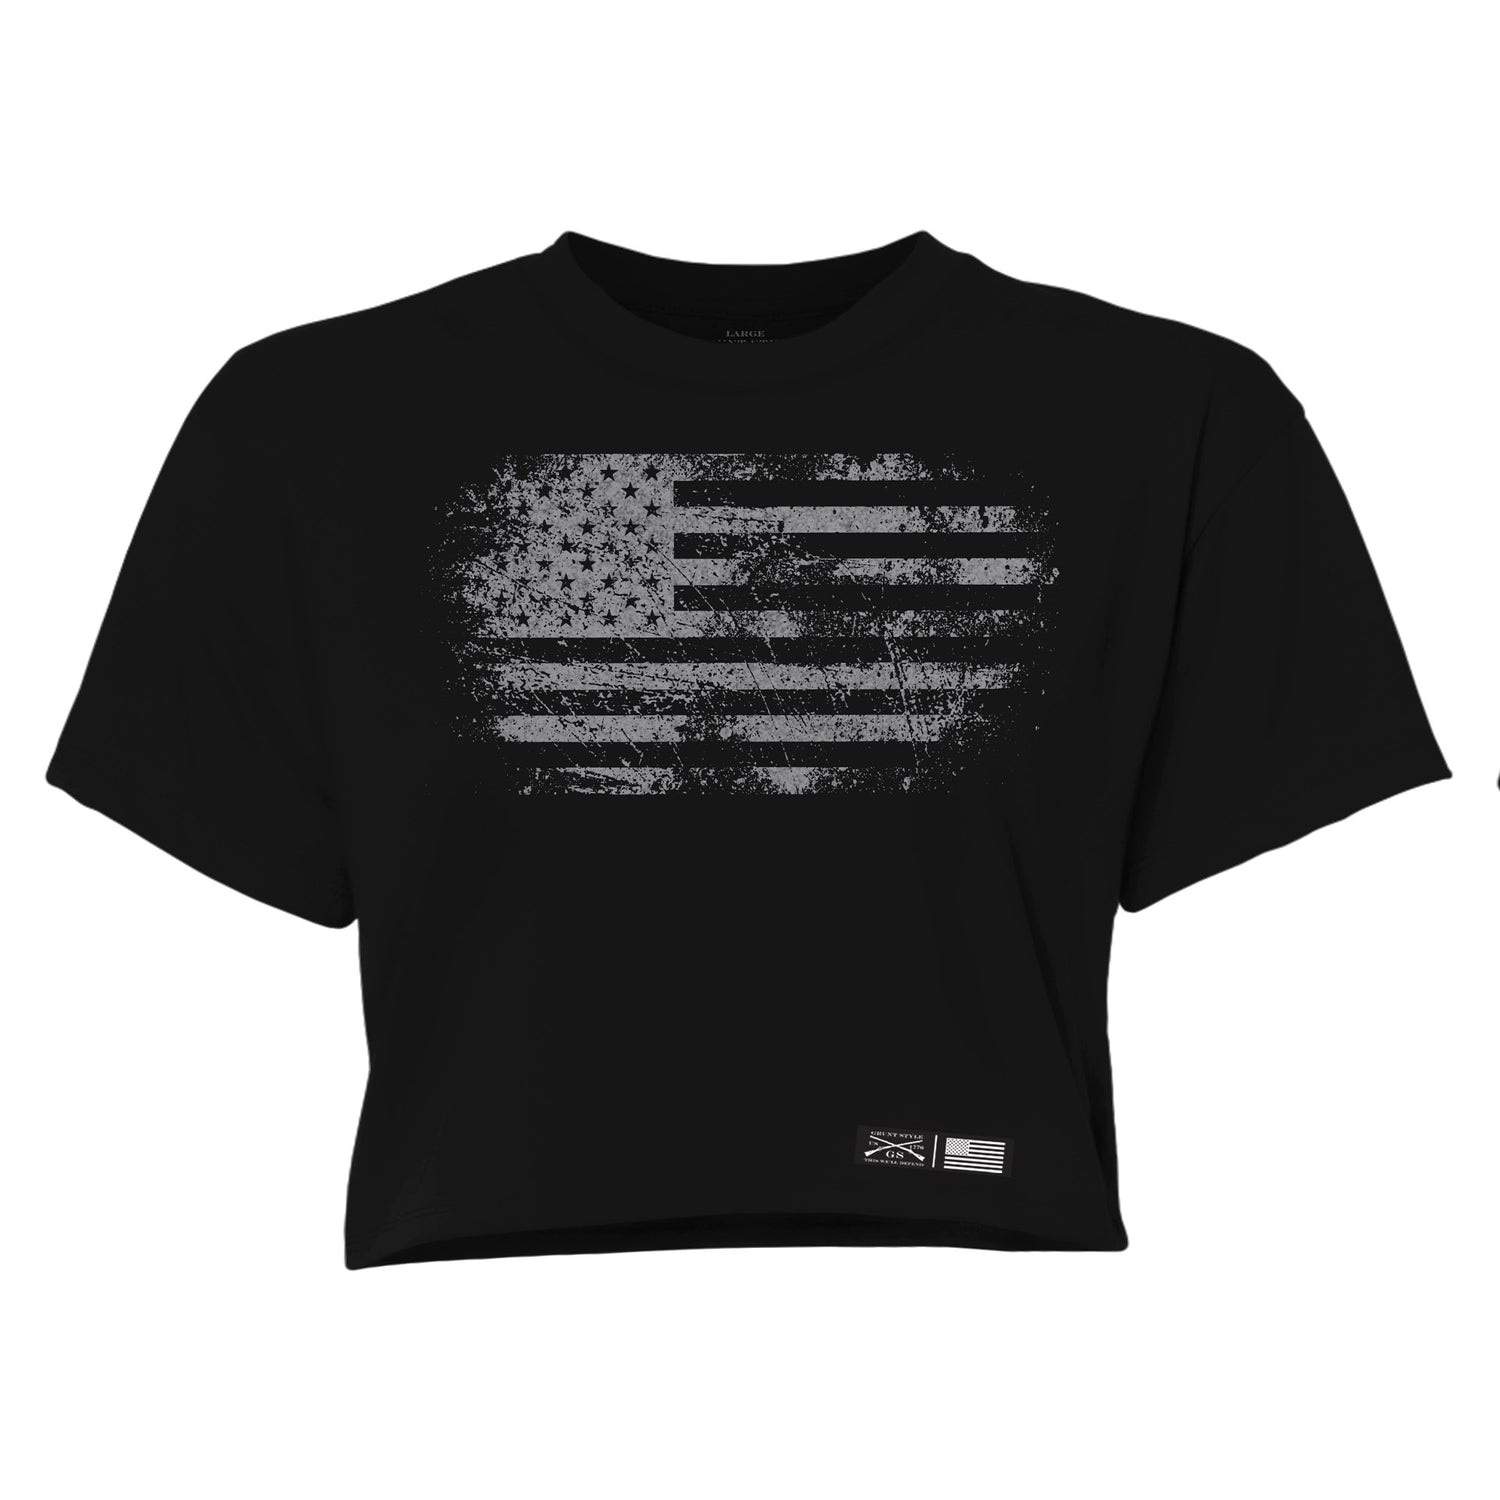 American Flag Shirts for Women 